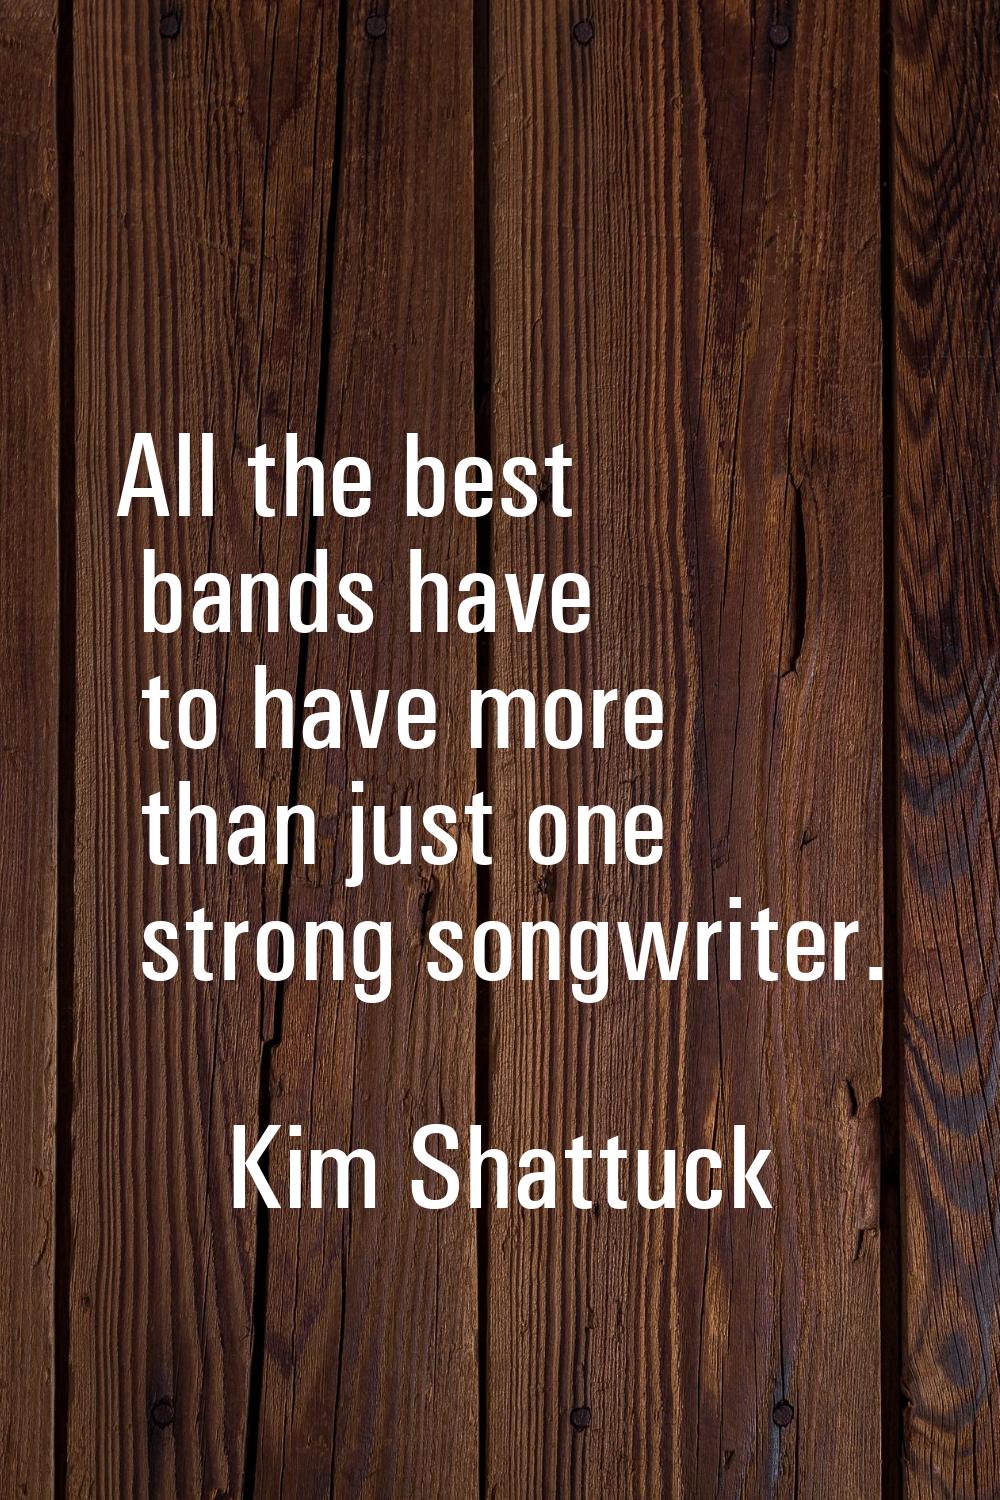 All the best bands have to have more than just one strong songwriter.